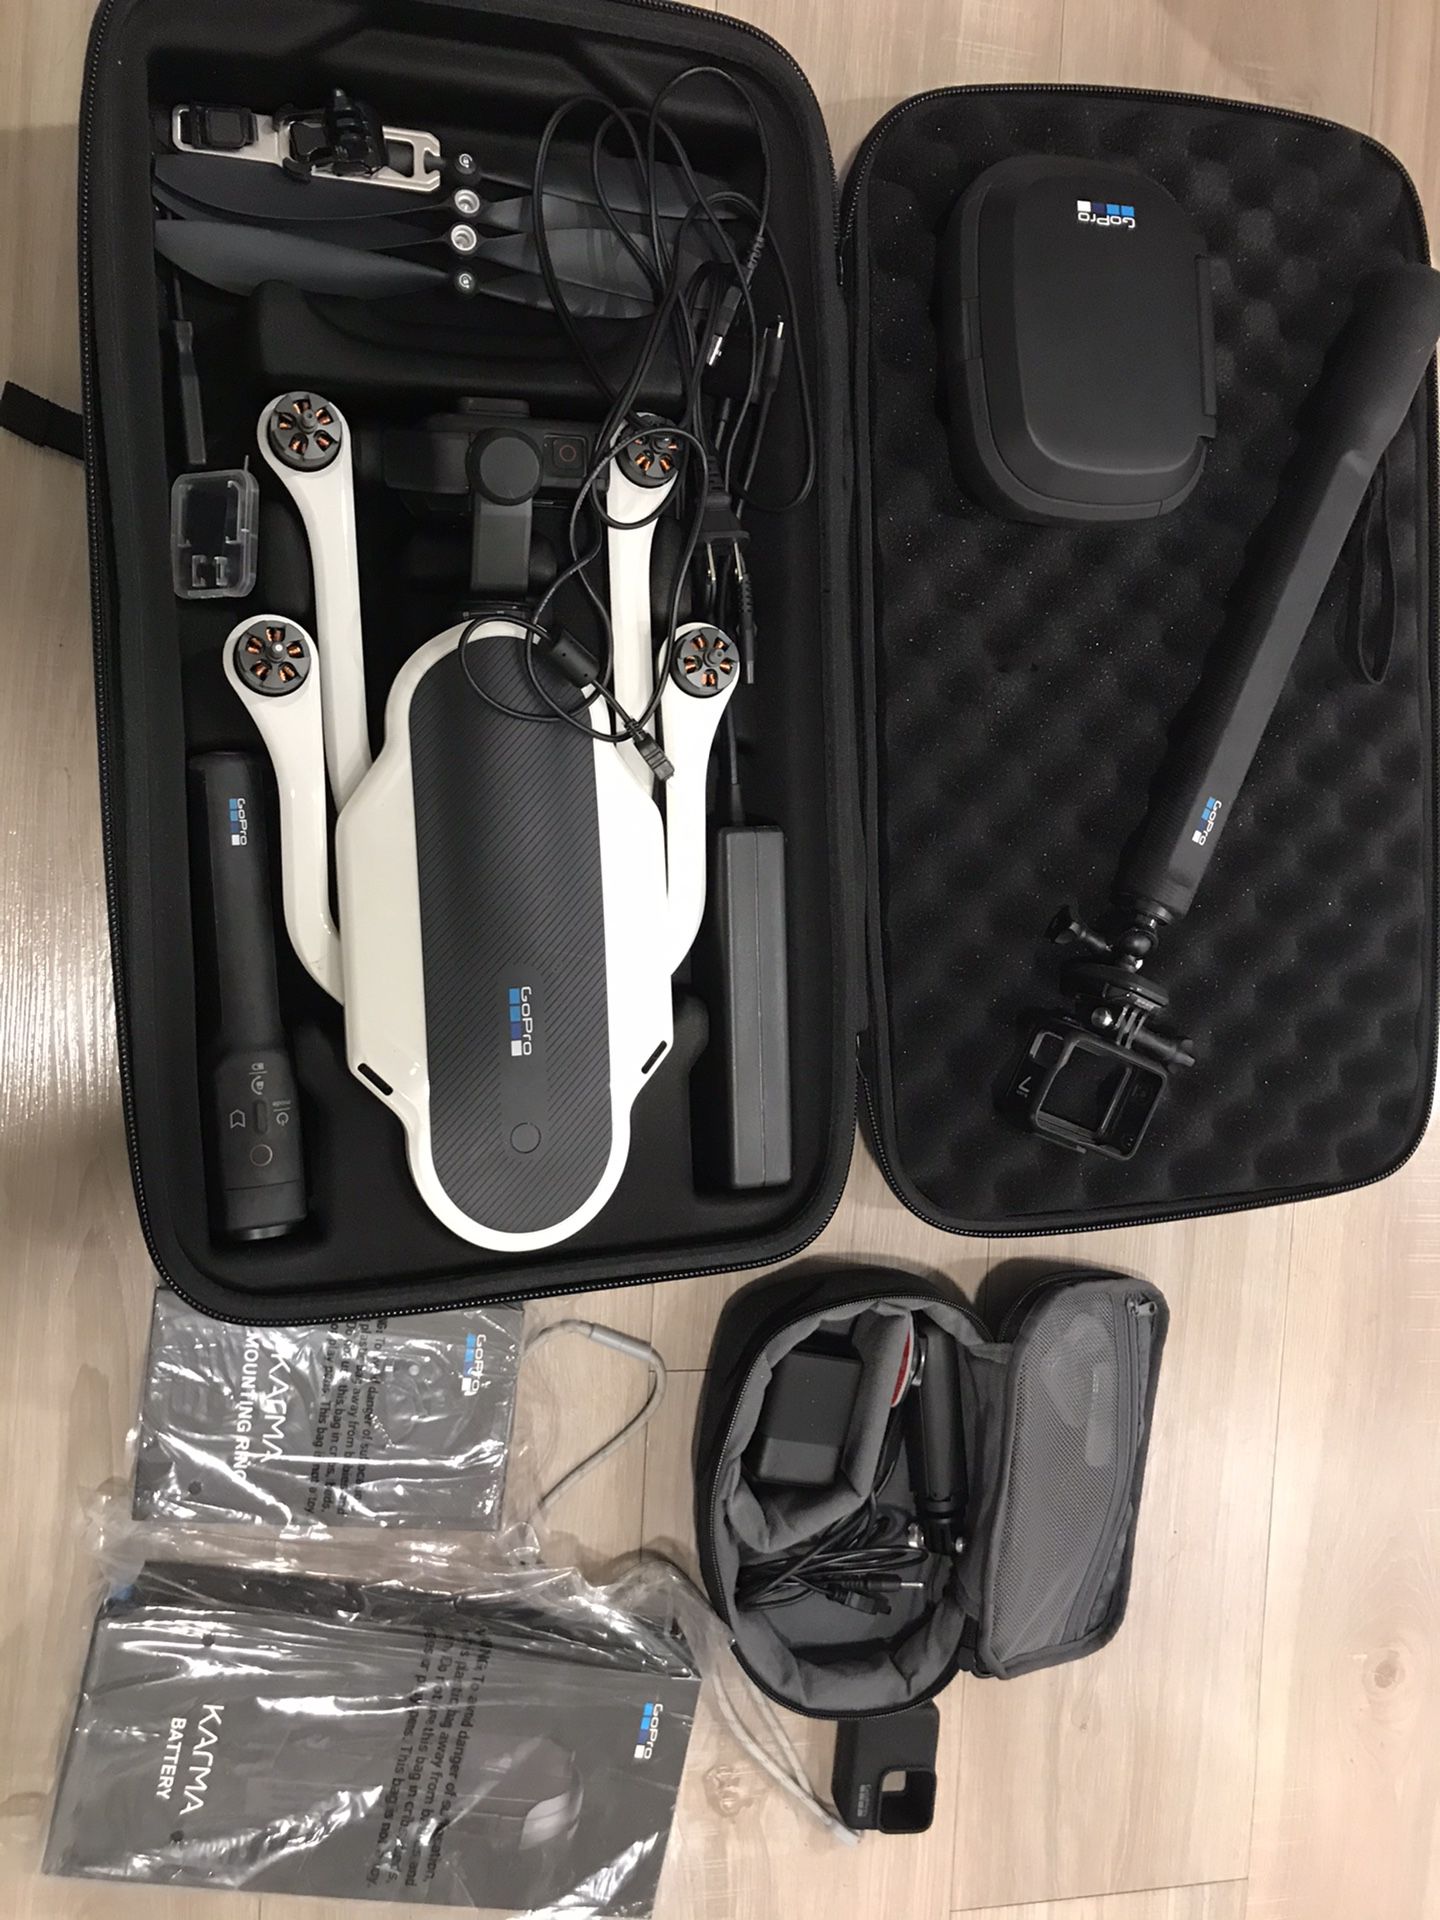 GoPro hero 7 black with drone and gimbal +extras